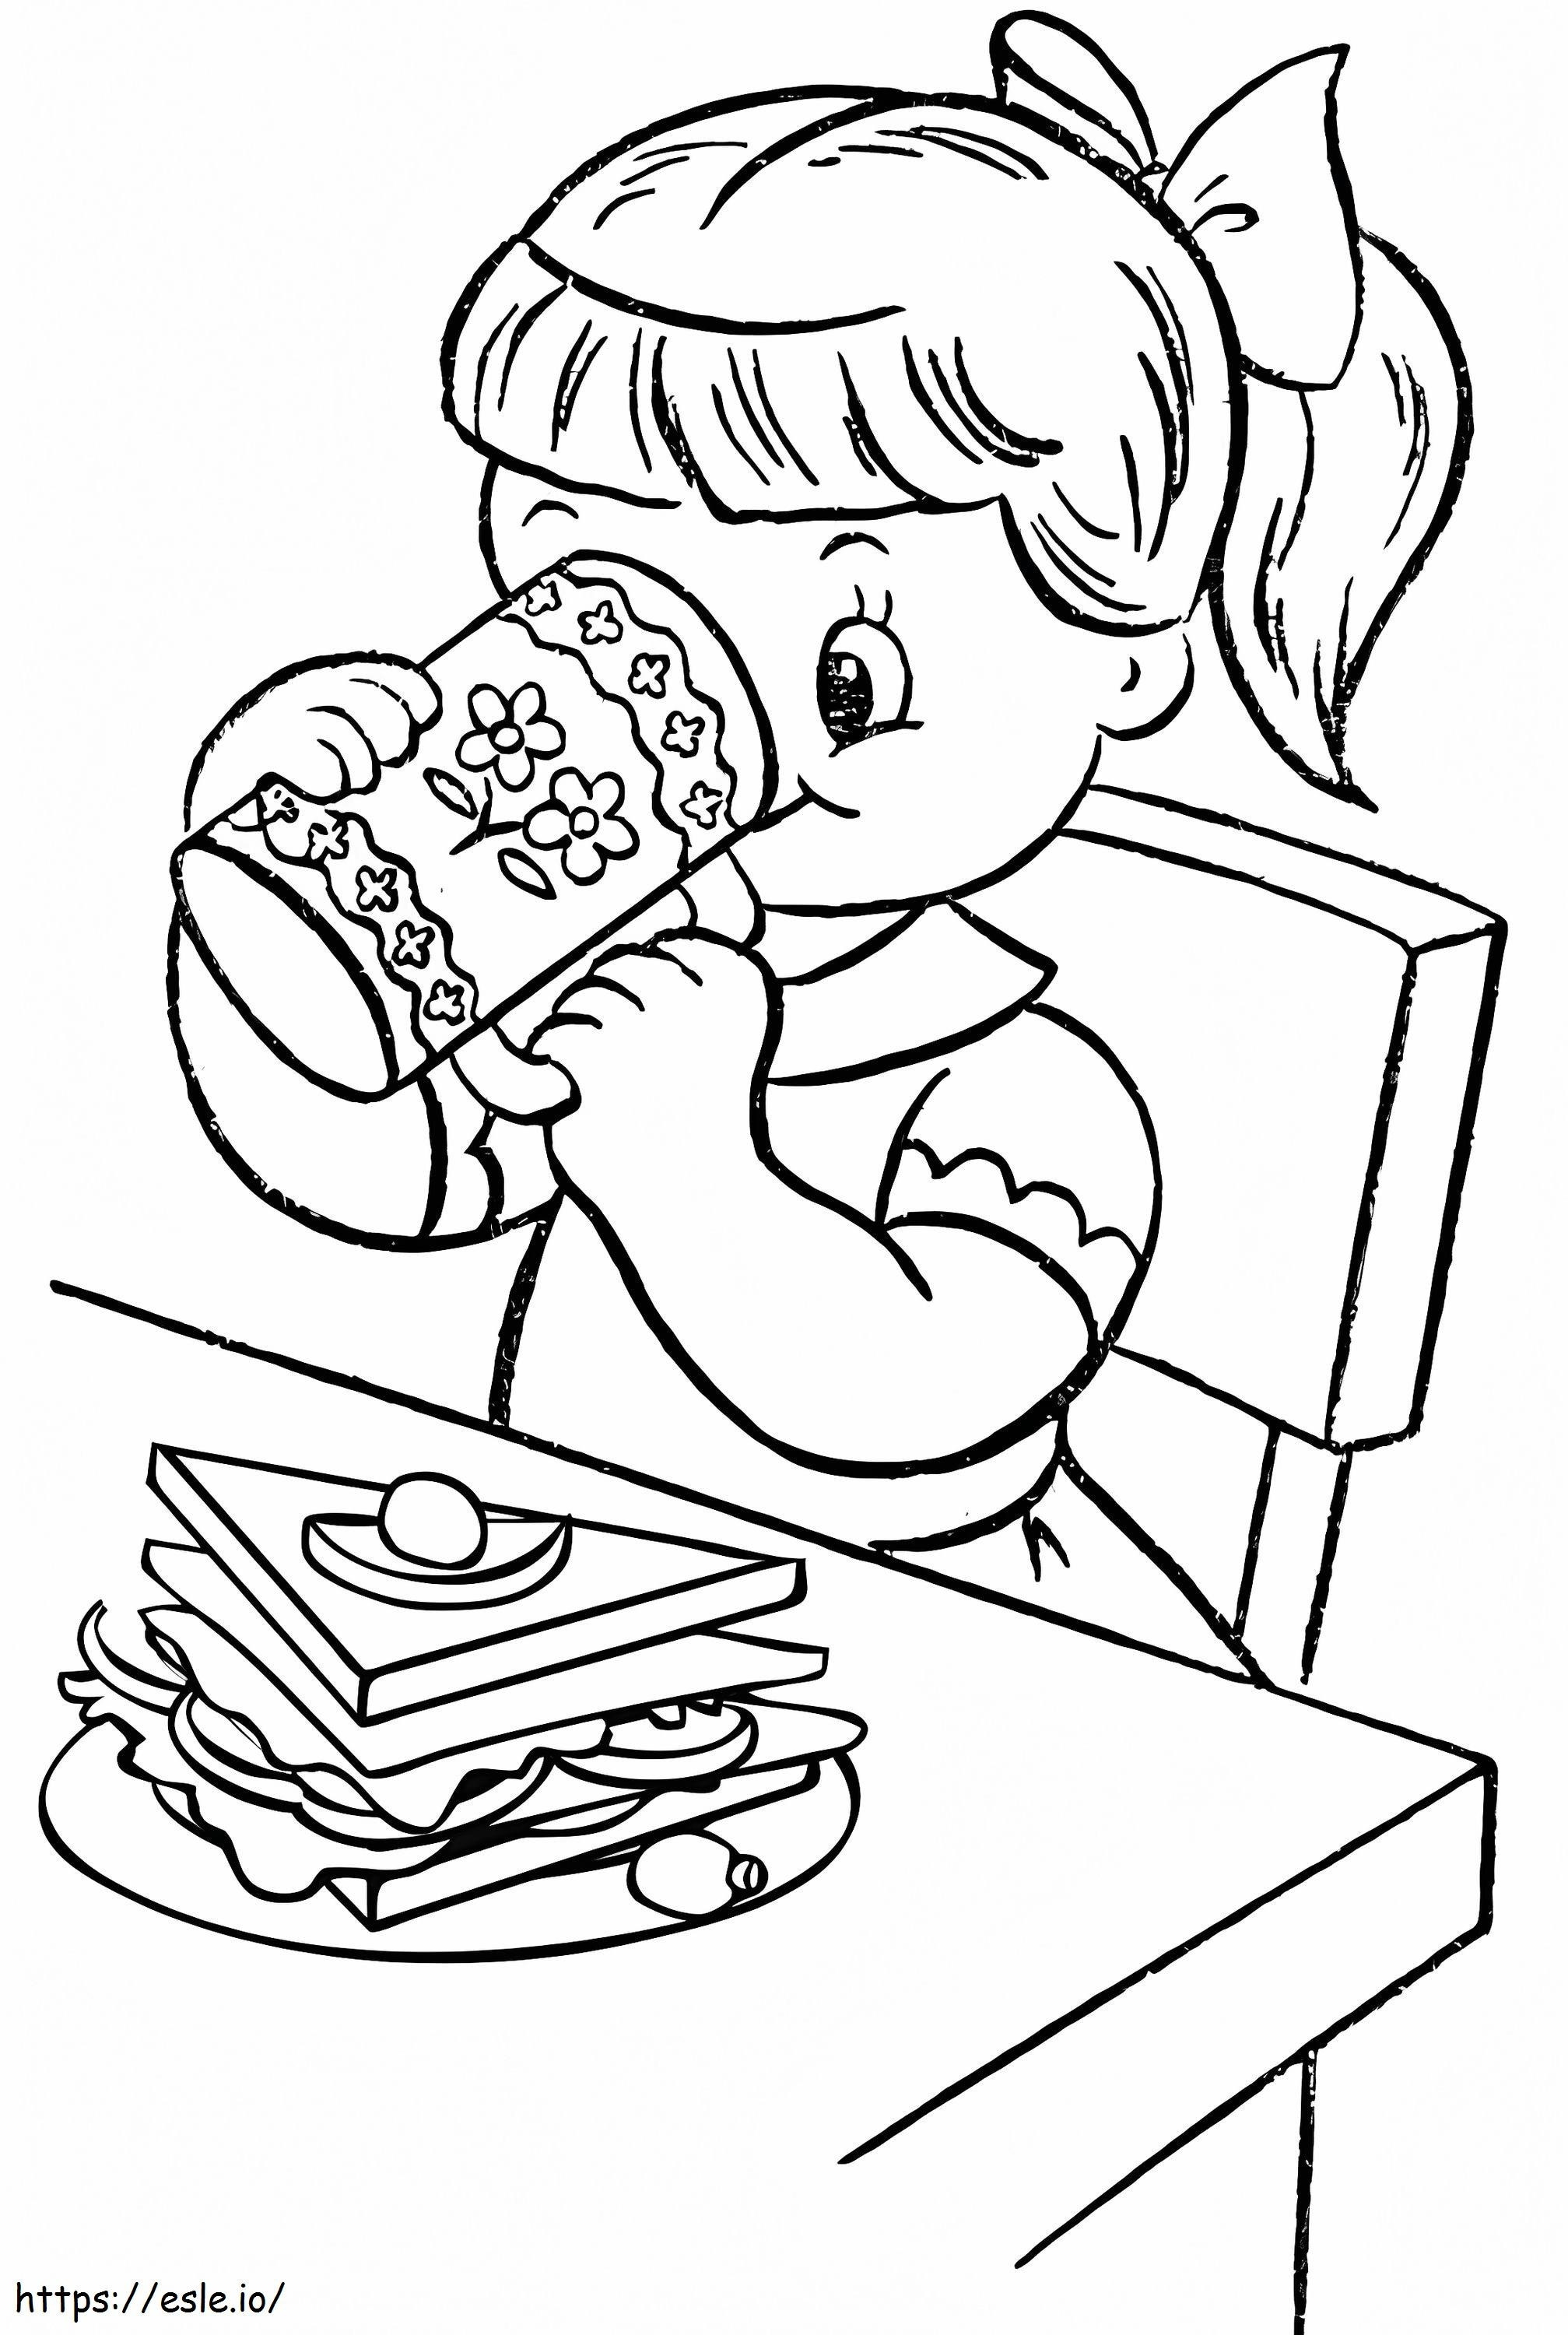 Have Breakfast coloring page